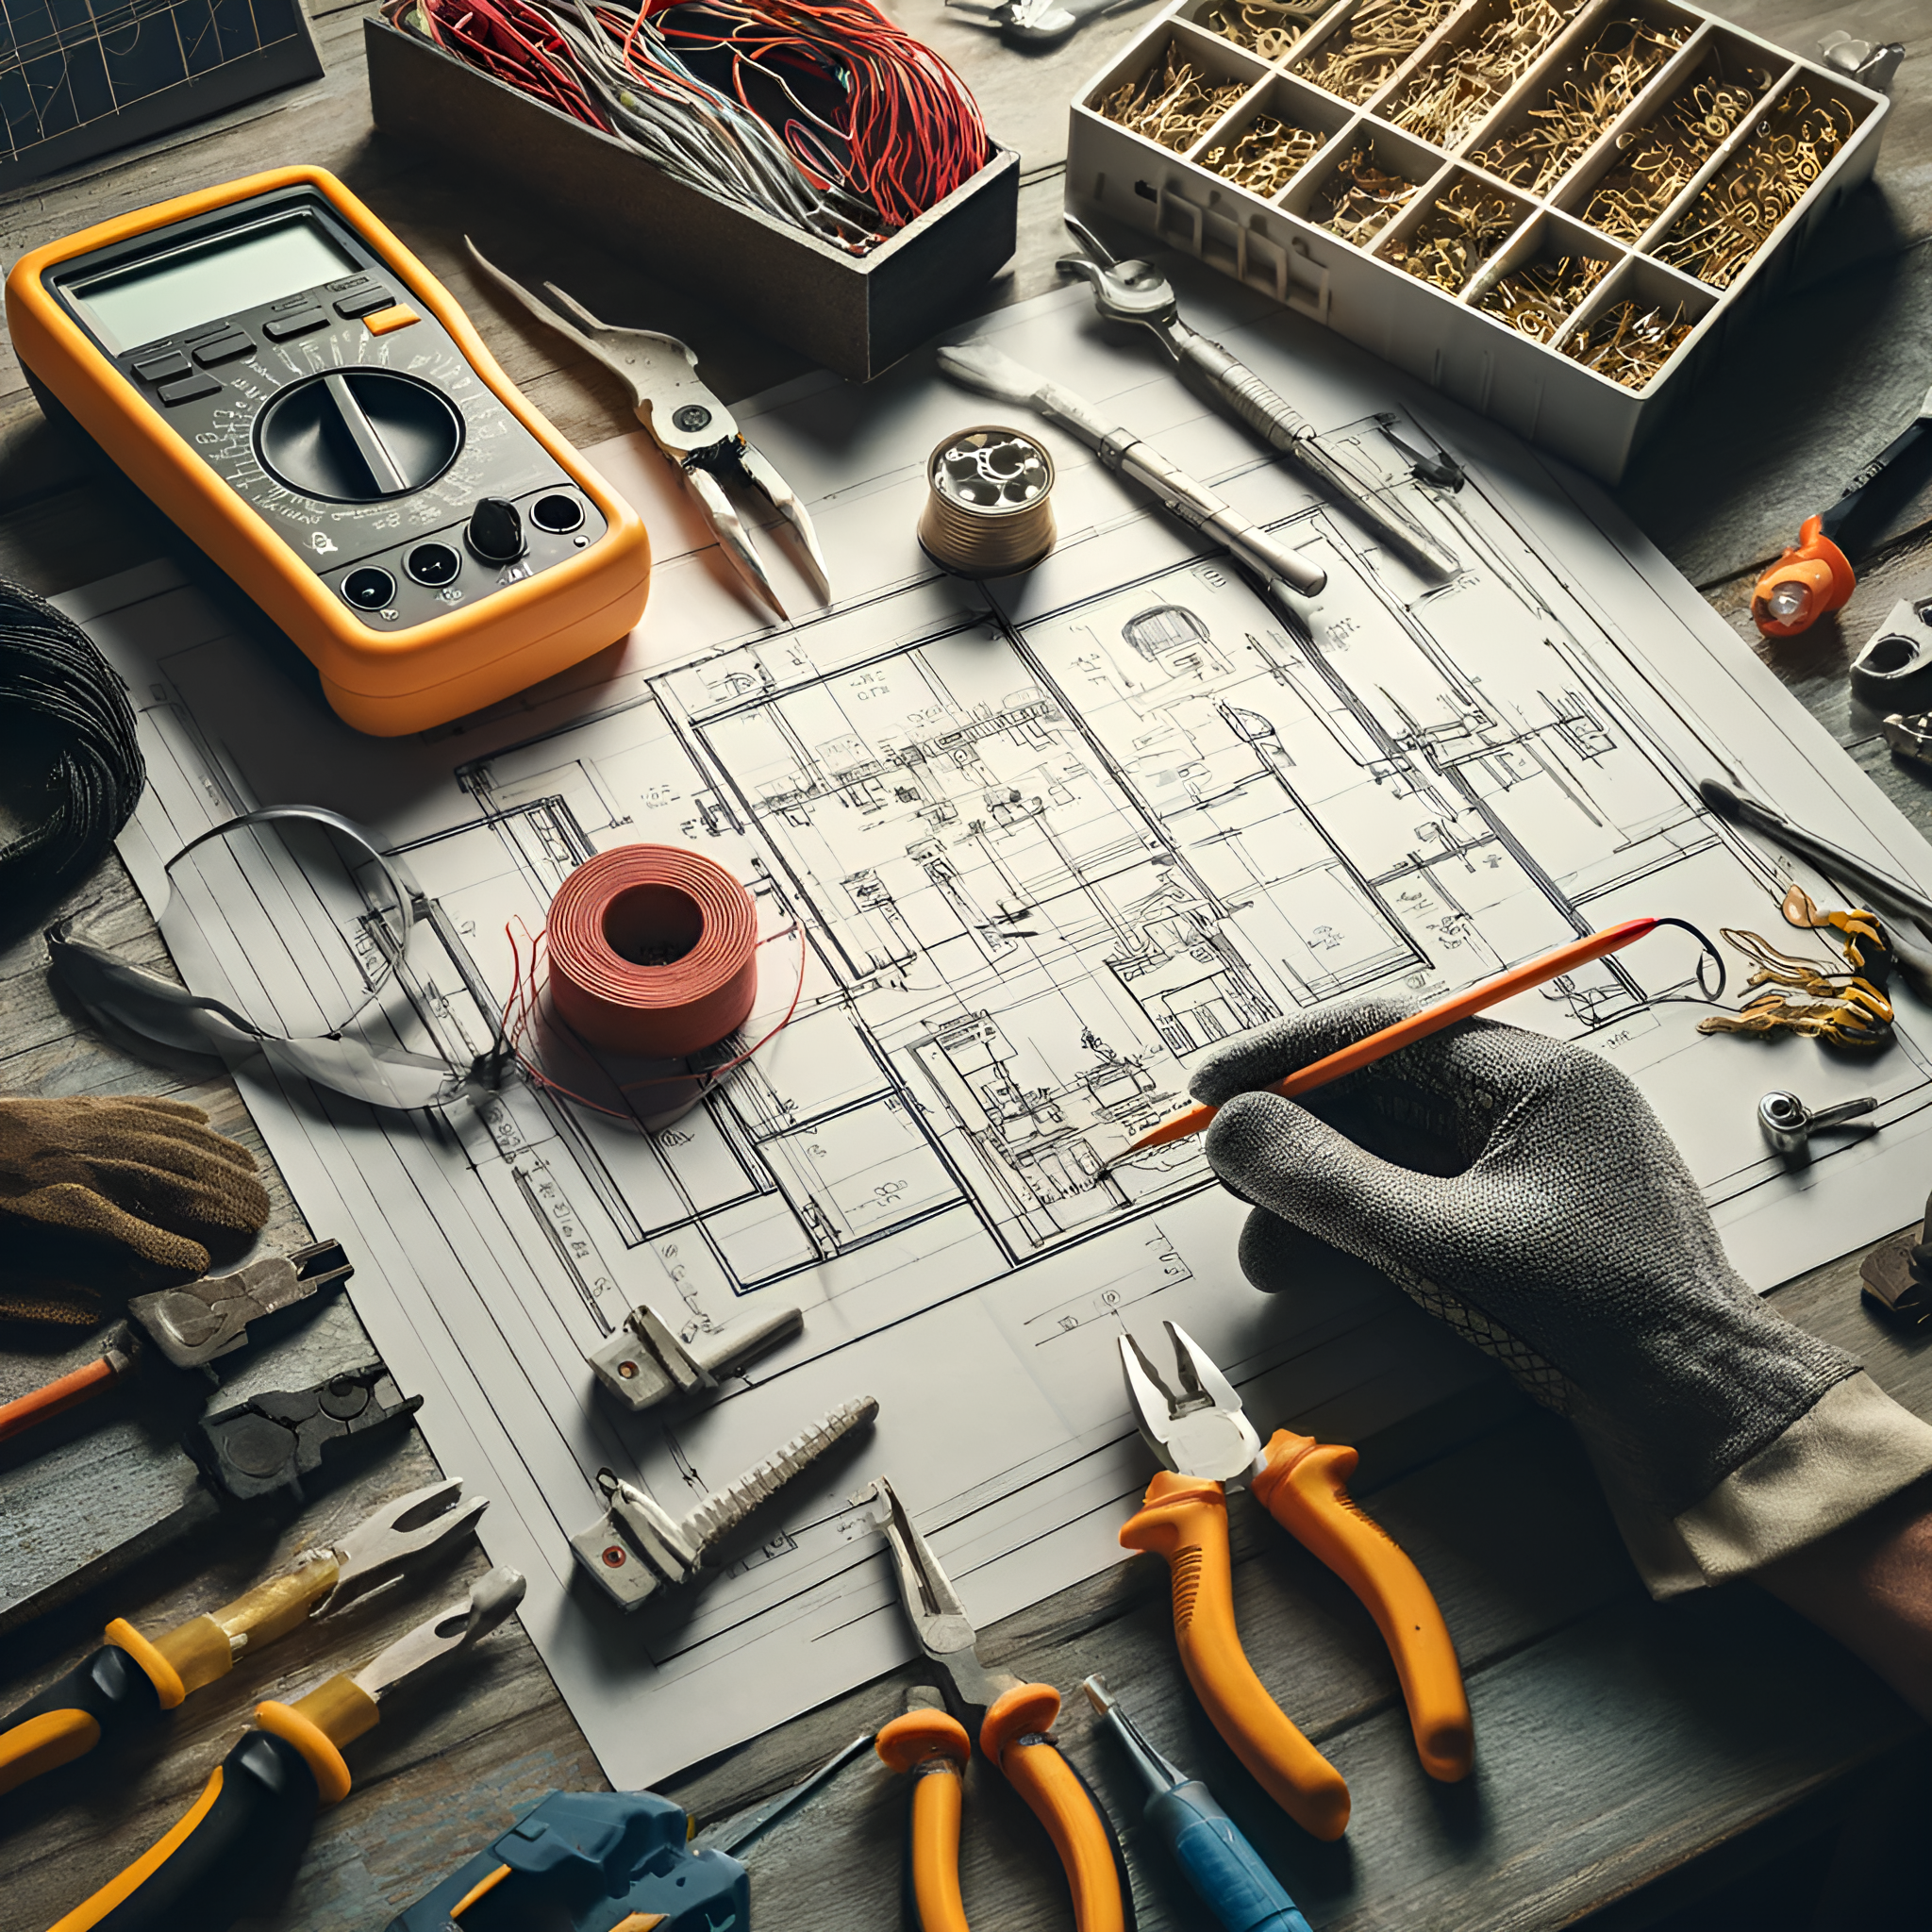 Electrical, Workspace, Blueprints, Tools, Safety Gear, Professional, Workbench, Electrical Panels, Expertise